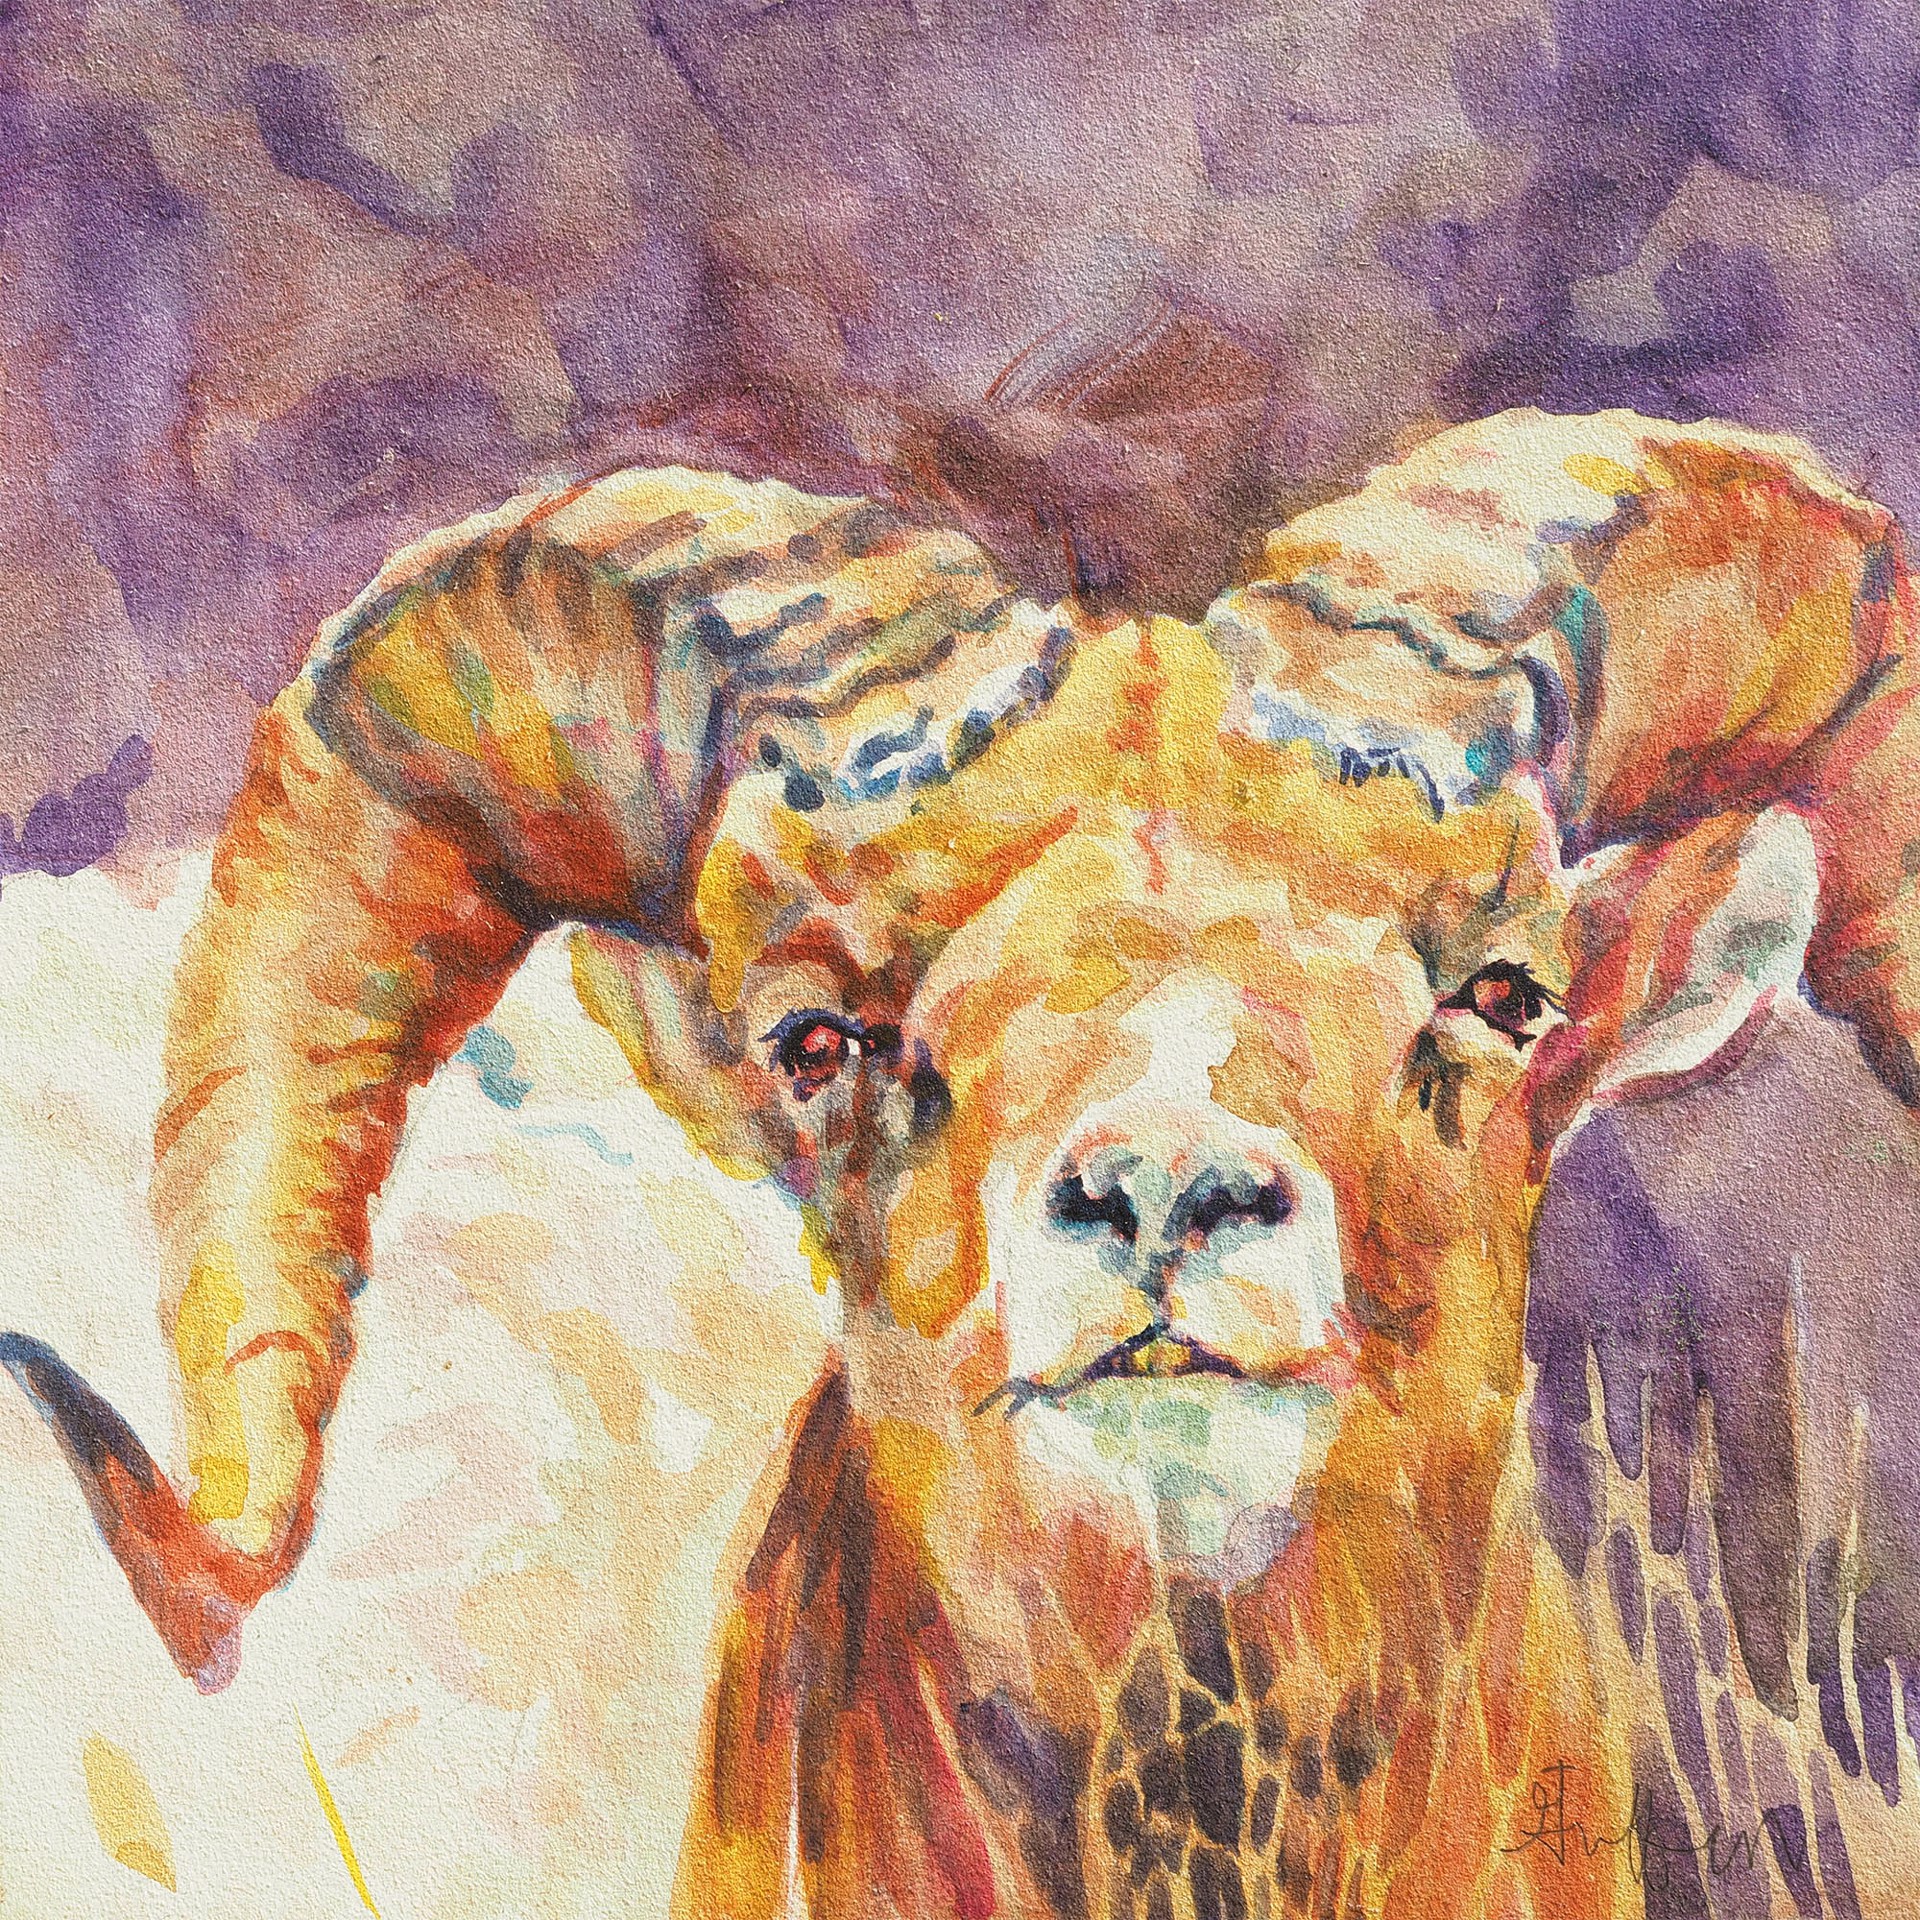 Original Watercolor Painting Featuring A Big Horn Sheep Over Purple Background